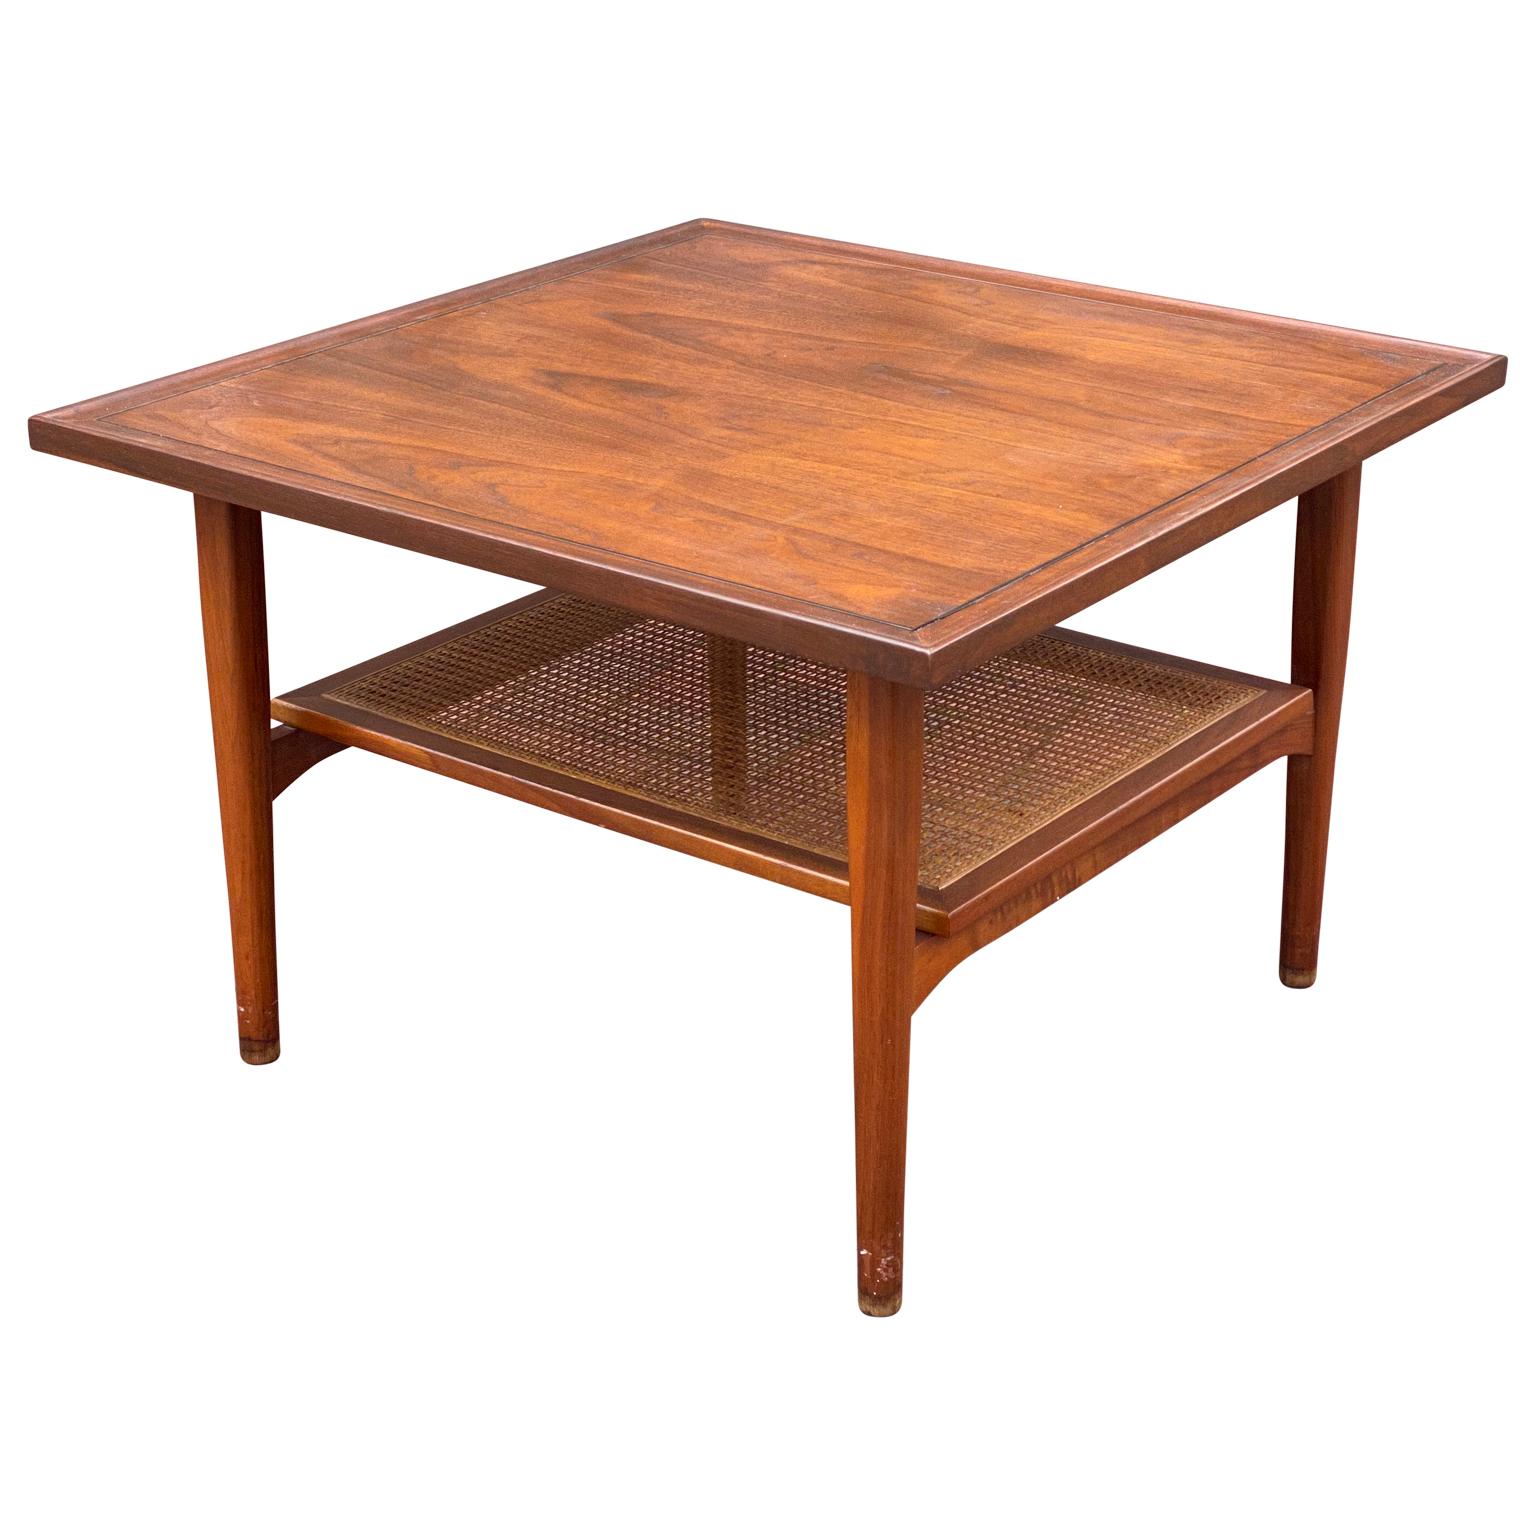 Vintage, Mid-Century Modern walnut and cane two tier coffee table or side table by Kipp Steward for Drexel Declaration. Not easily found, this beautiful square table has been expertly refinished to restore it's original glow. The caned lower shelf